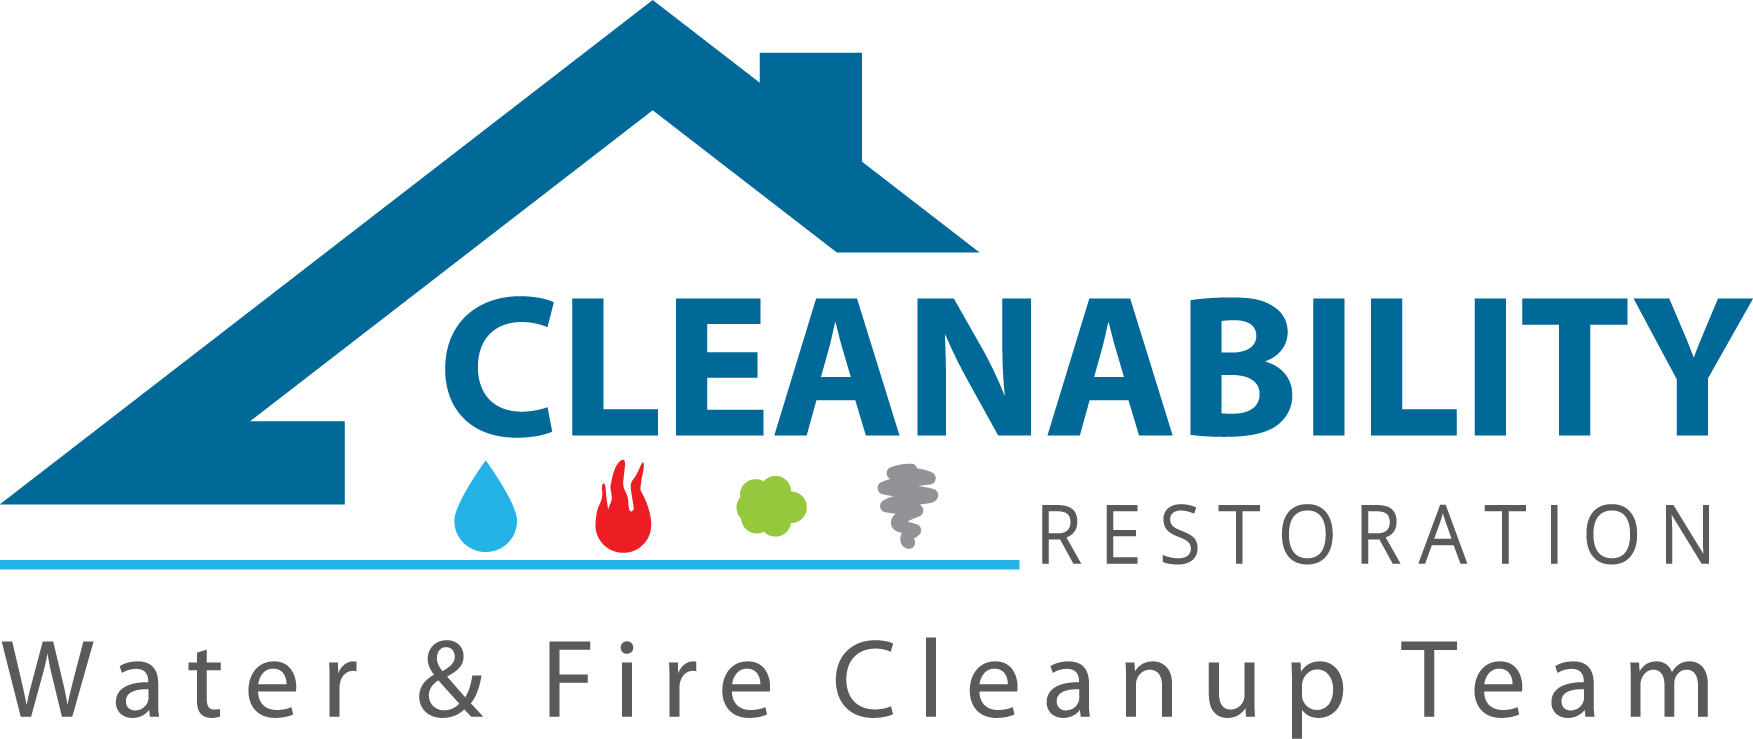 cleanability